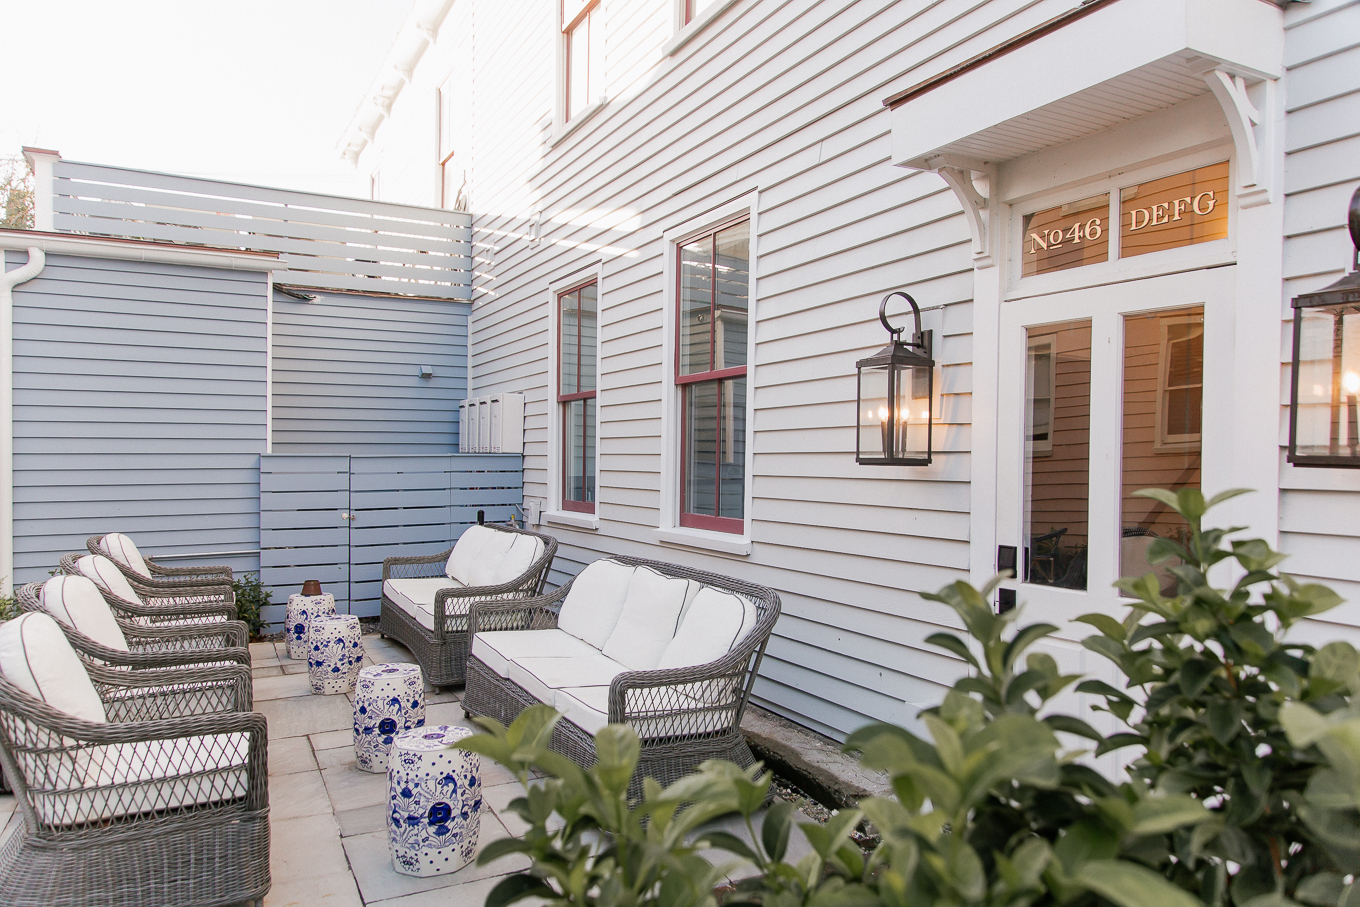 Guesthouse Charleston Review | Louella Reese